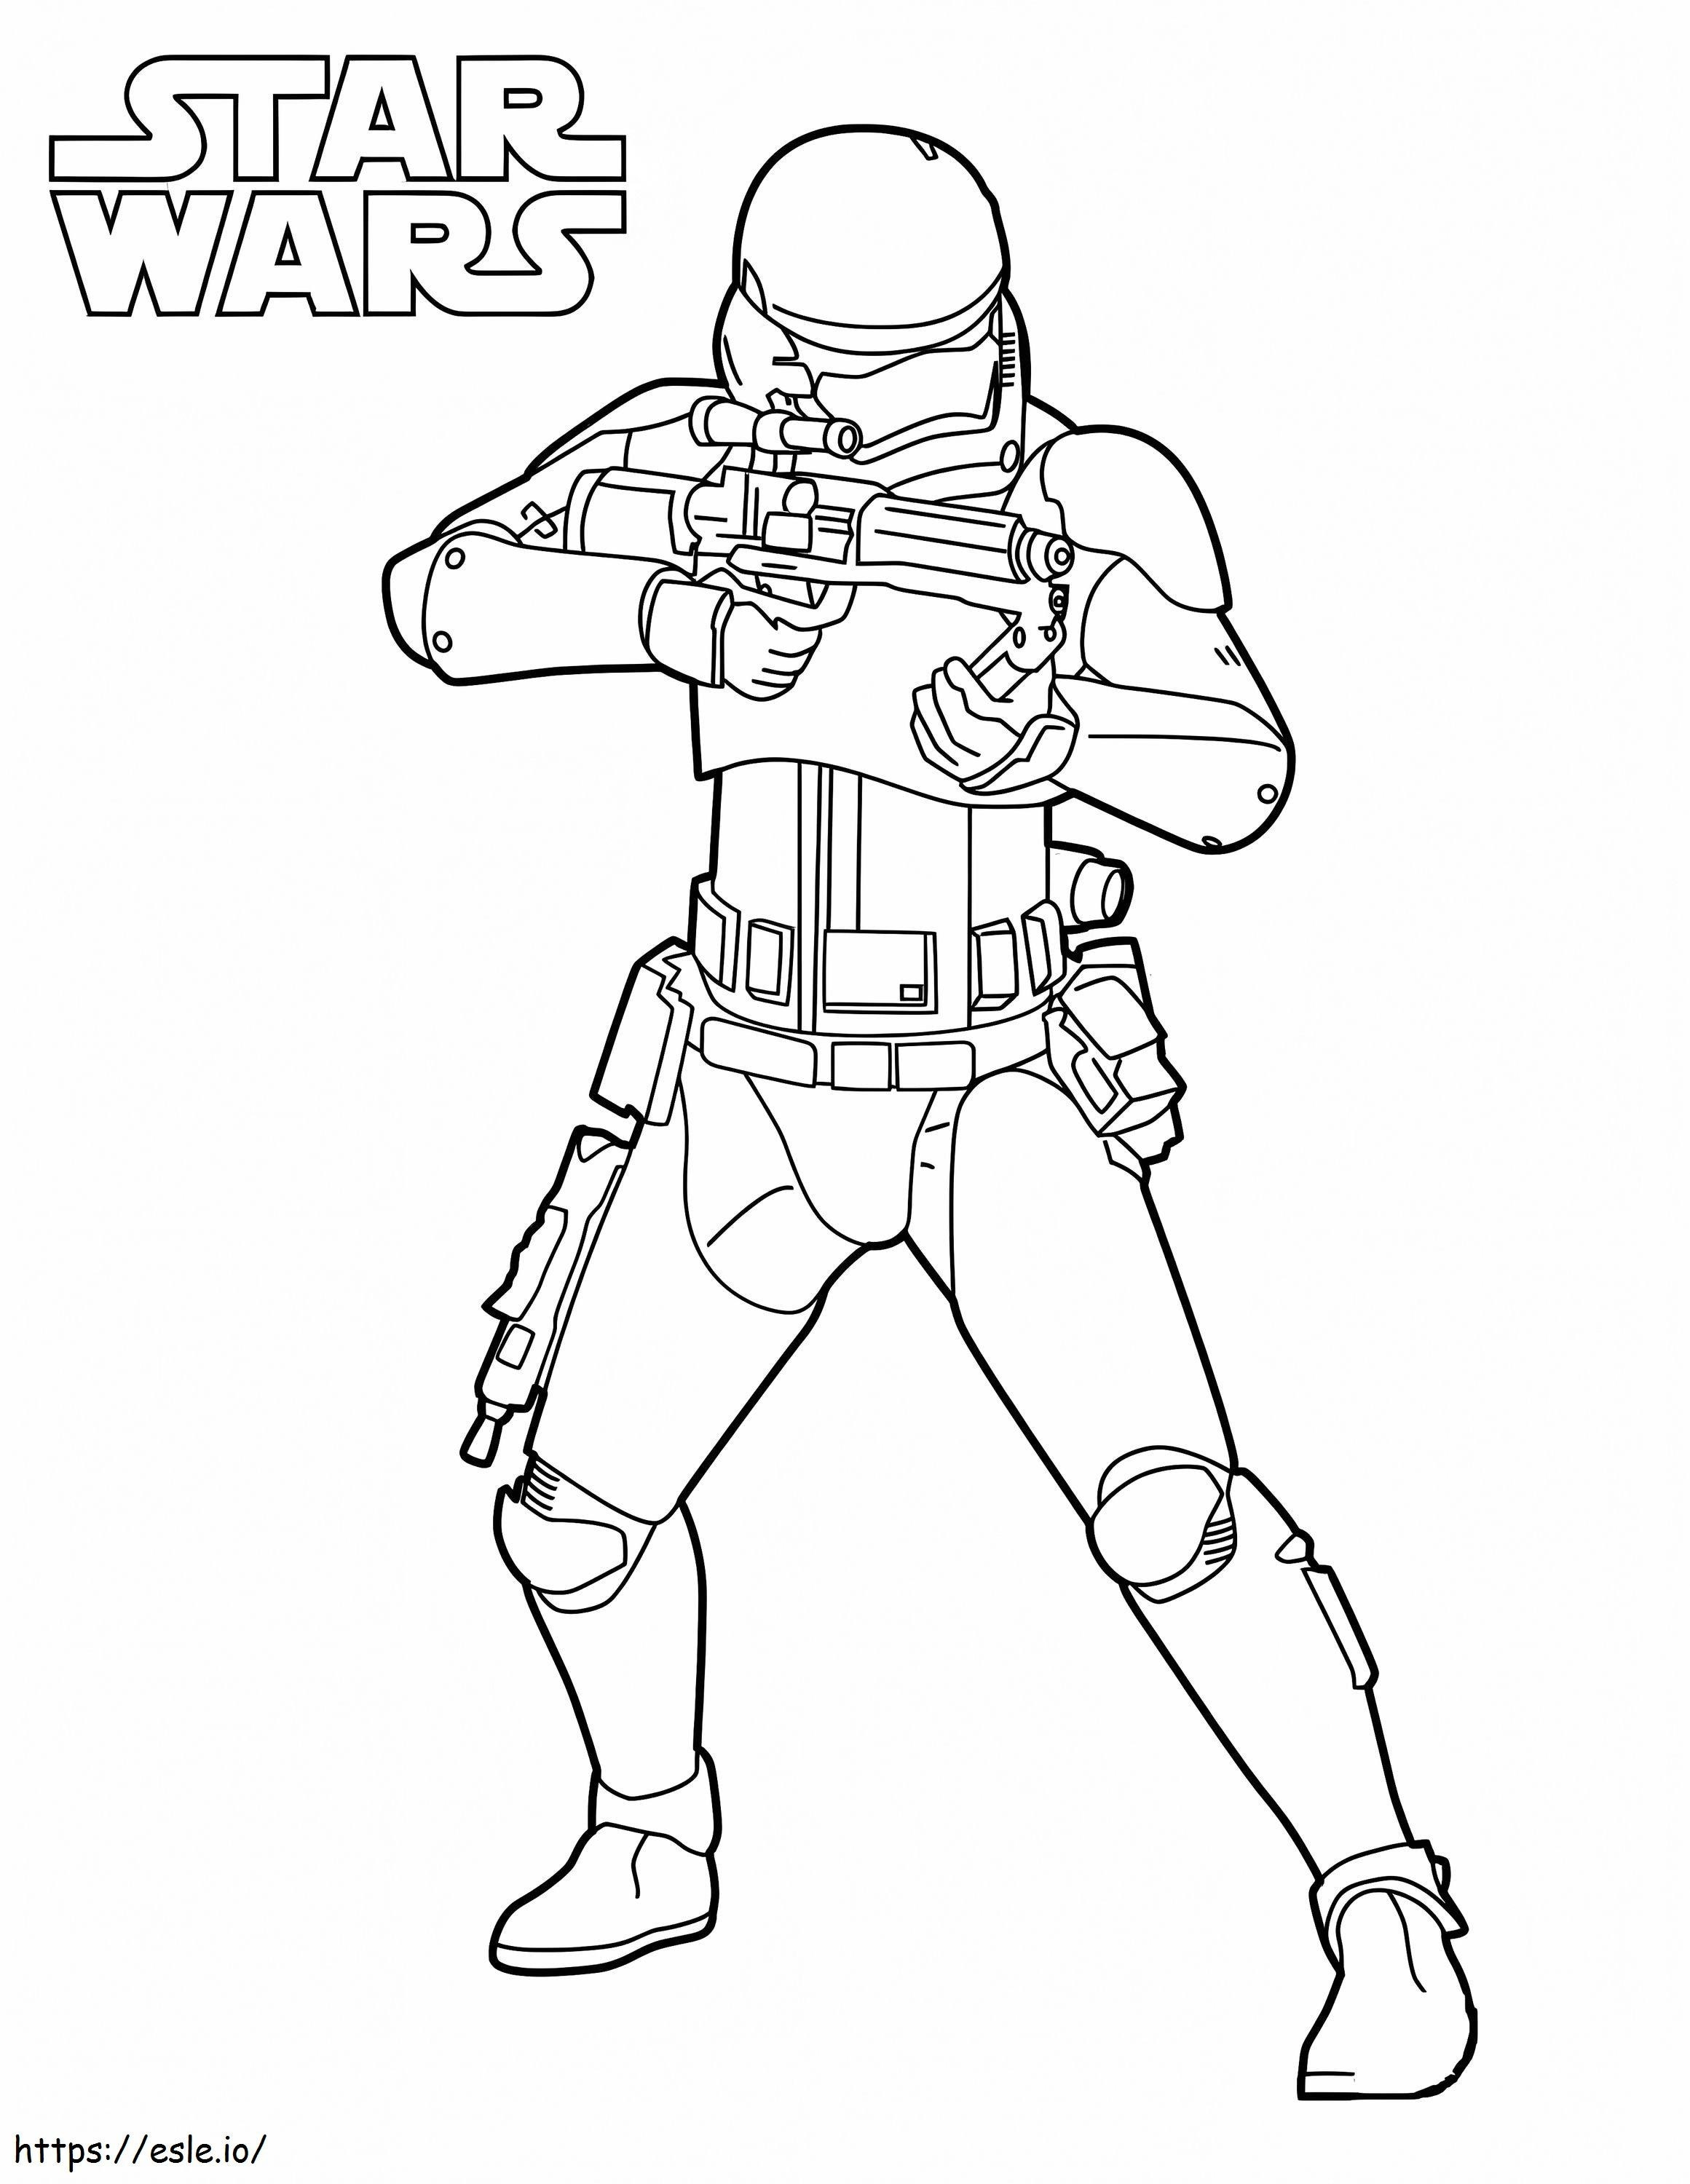 Stormtrooper 5 coloring page